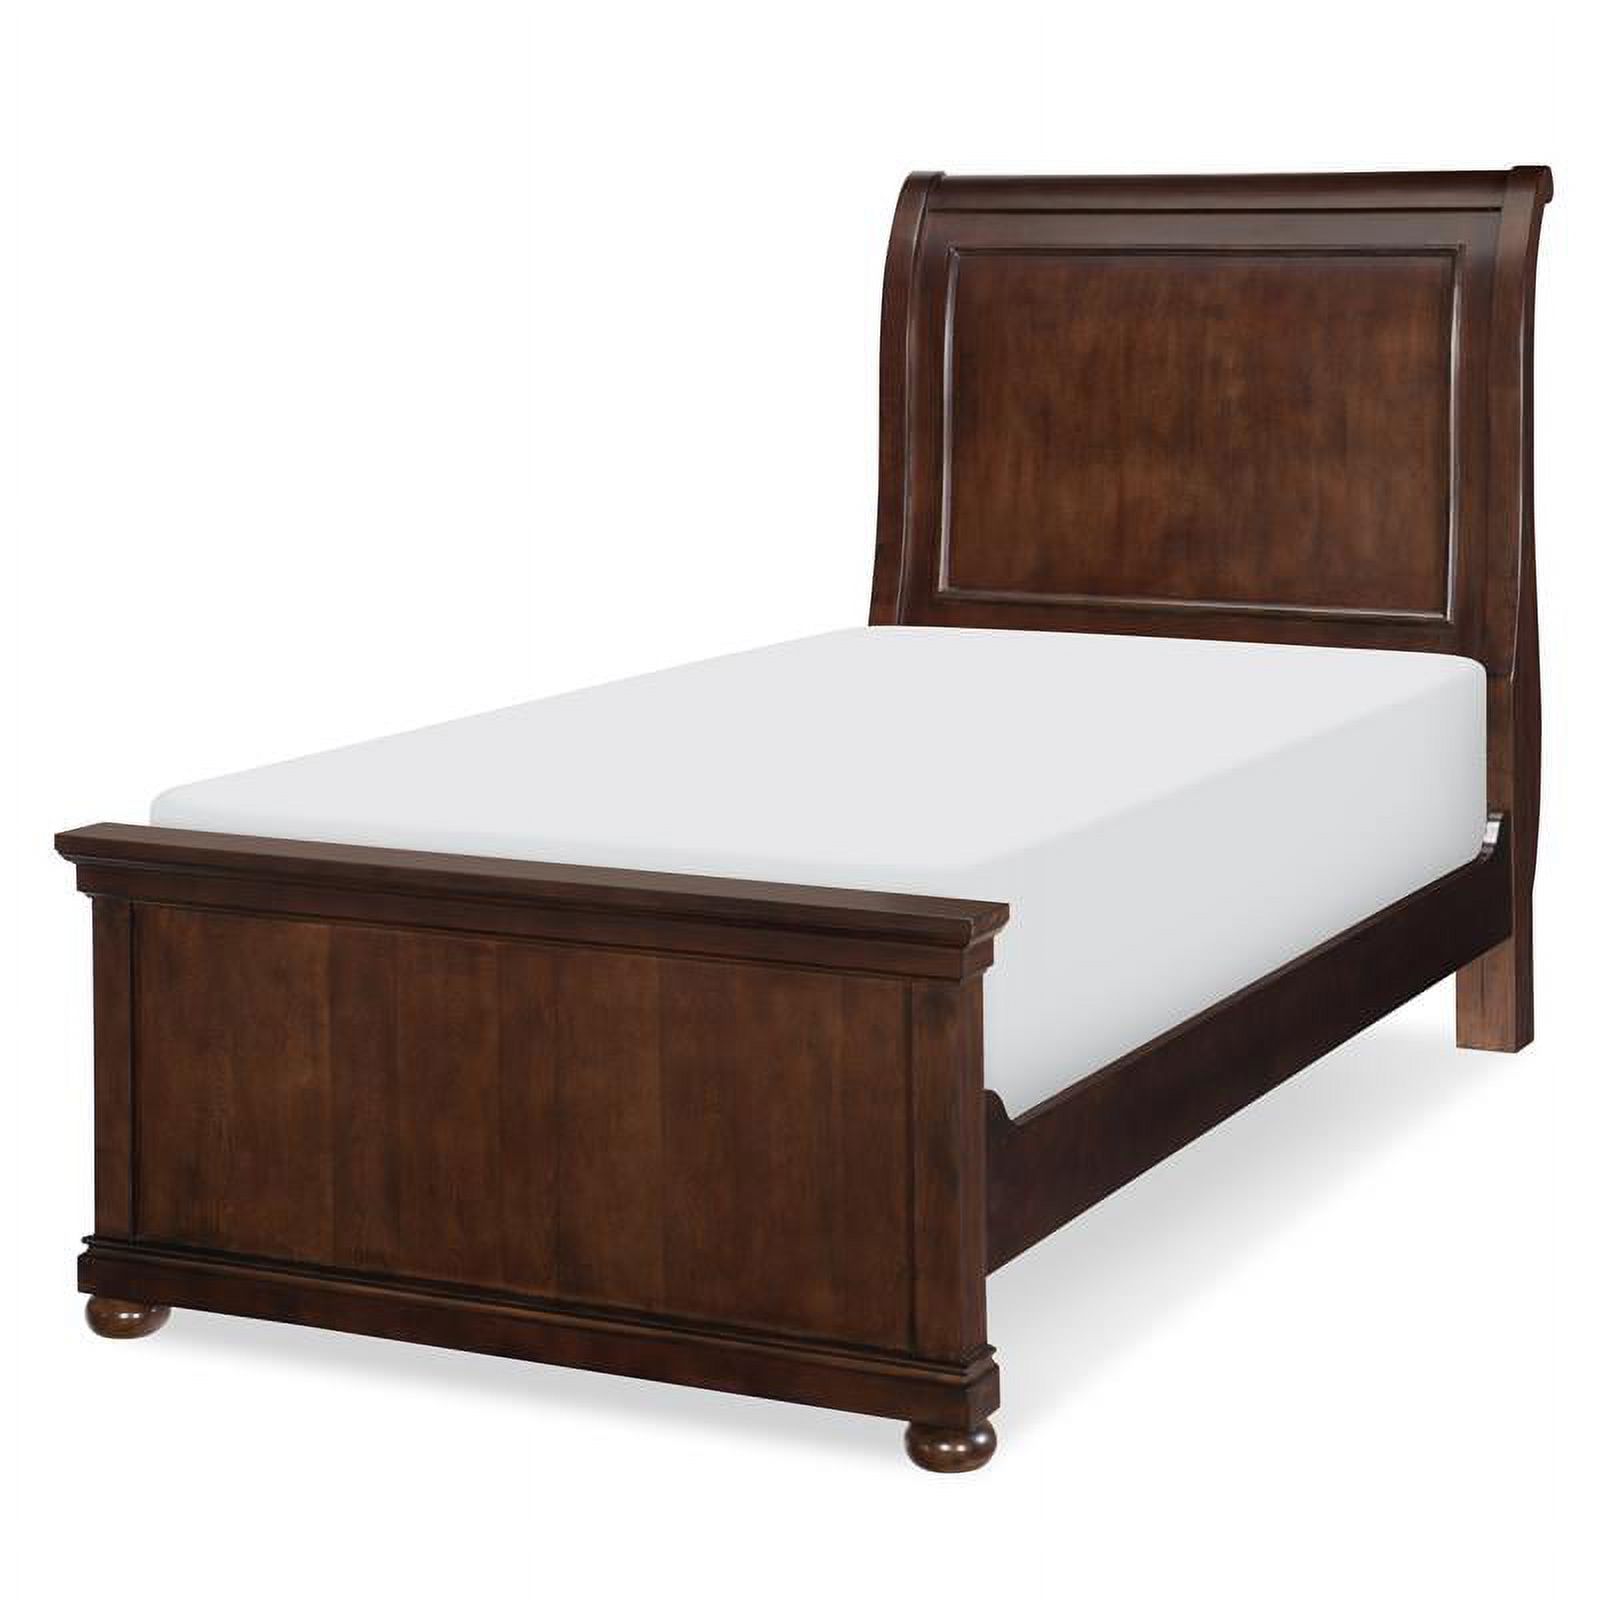 Legacy Classic Classic Canterbury Twin Sleigh Bed in Warm Cherry Finish Wood - image 1 of 4